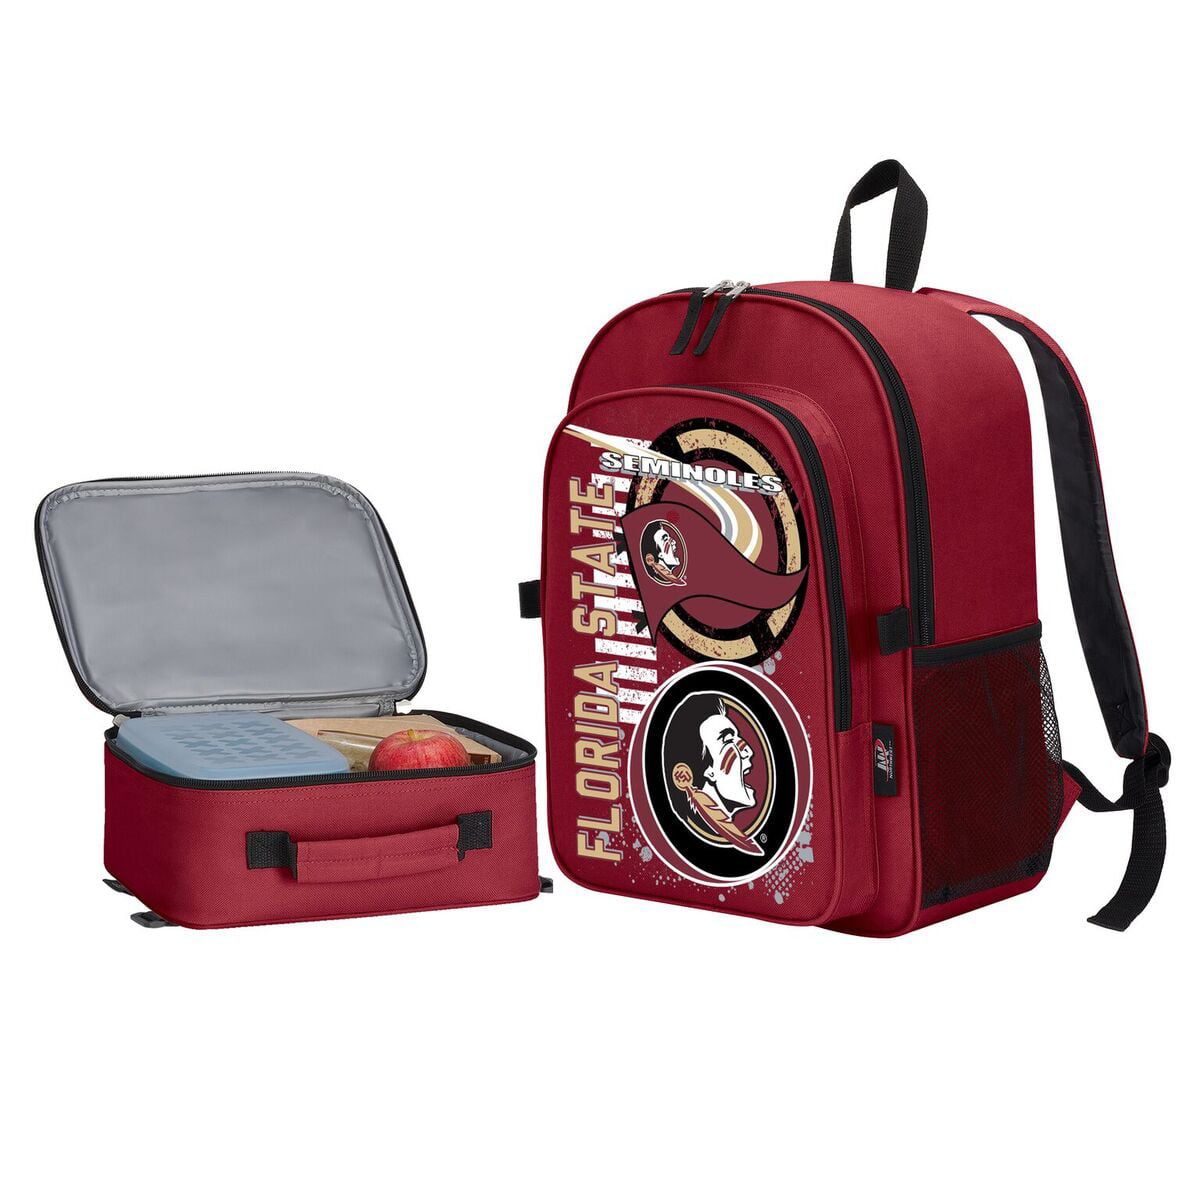 Officially Licensed NCAA Sacked Lunch Cooler Bag 10.5 x 8.5 x 4 Multi Color 